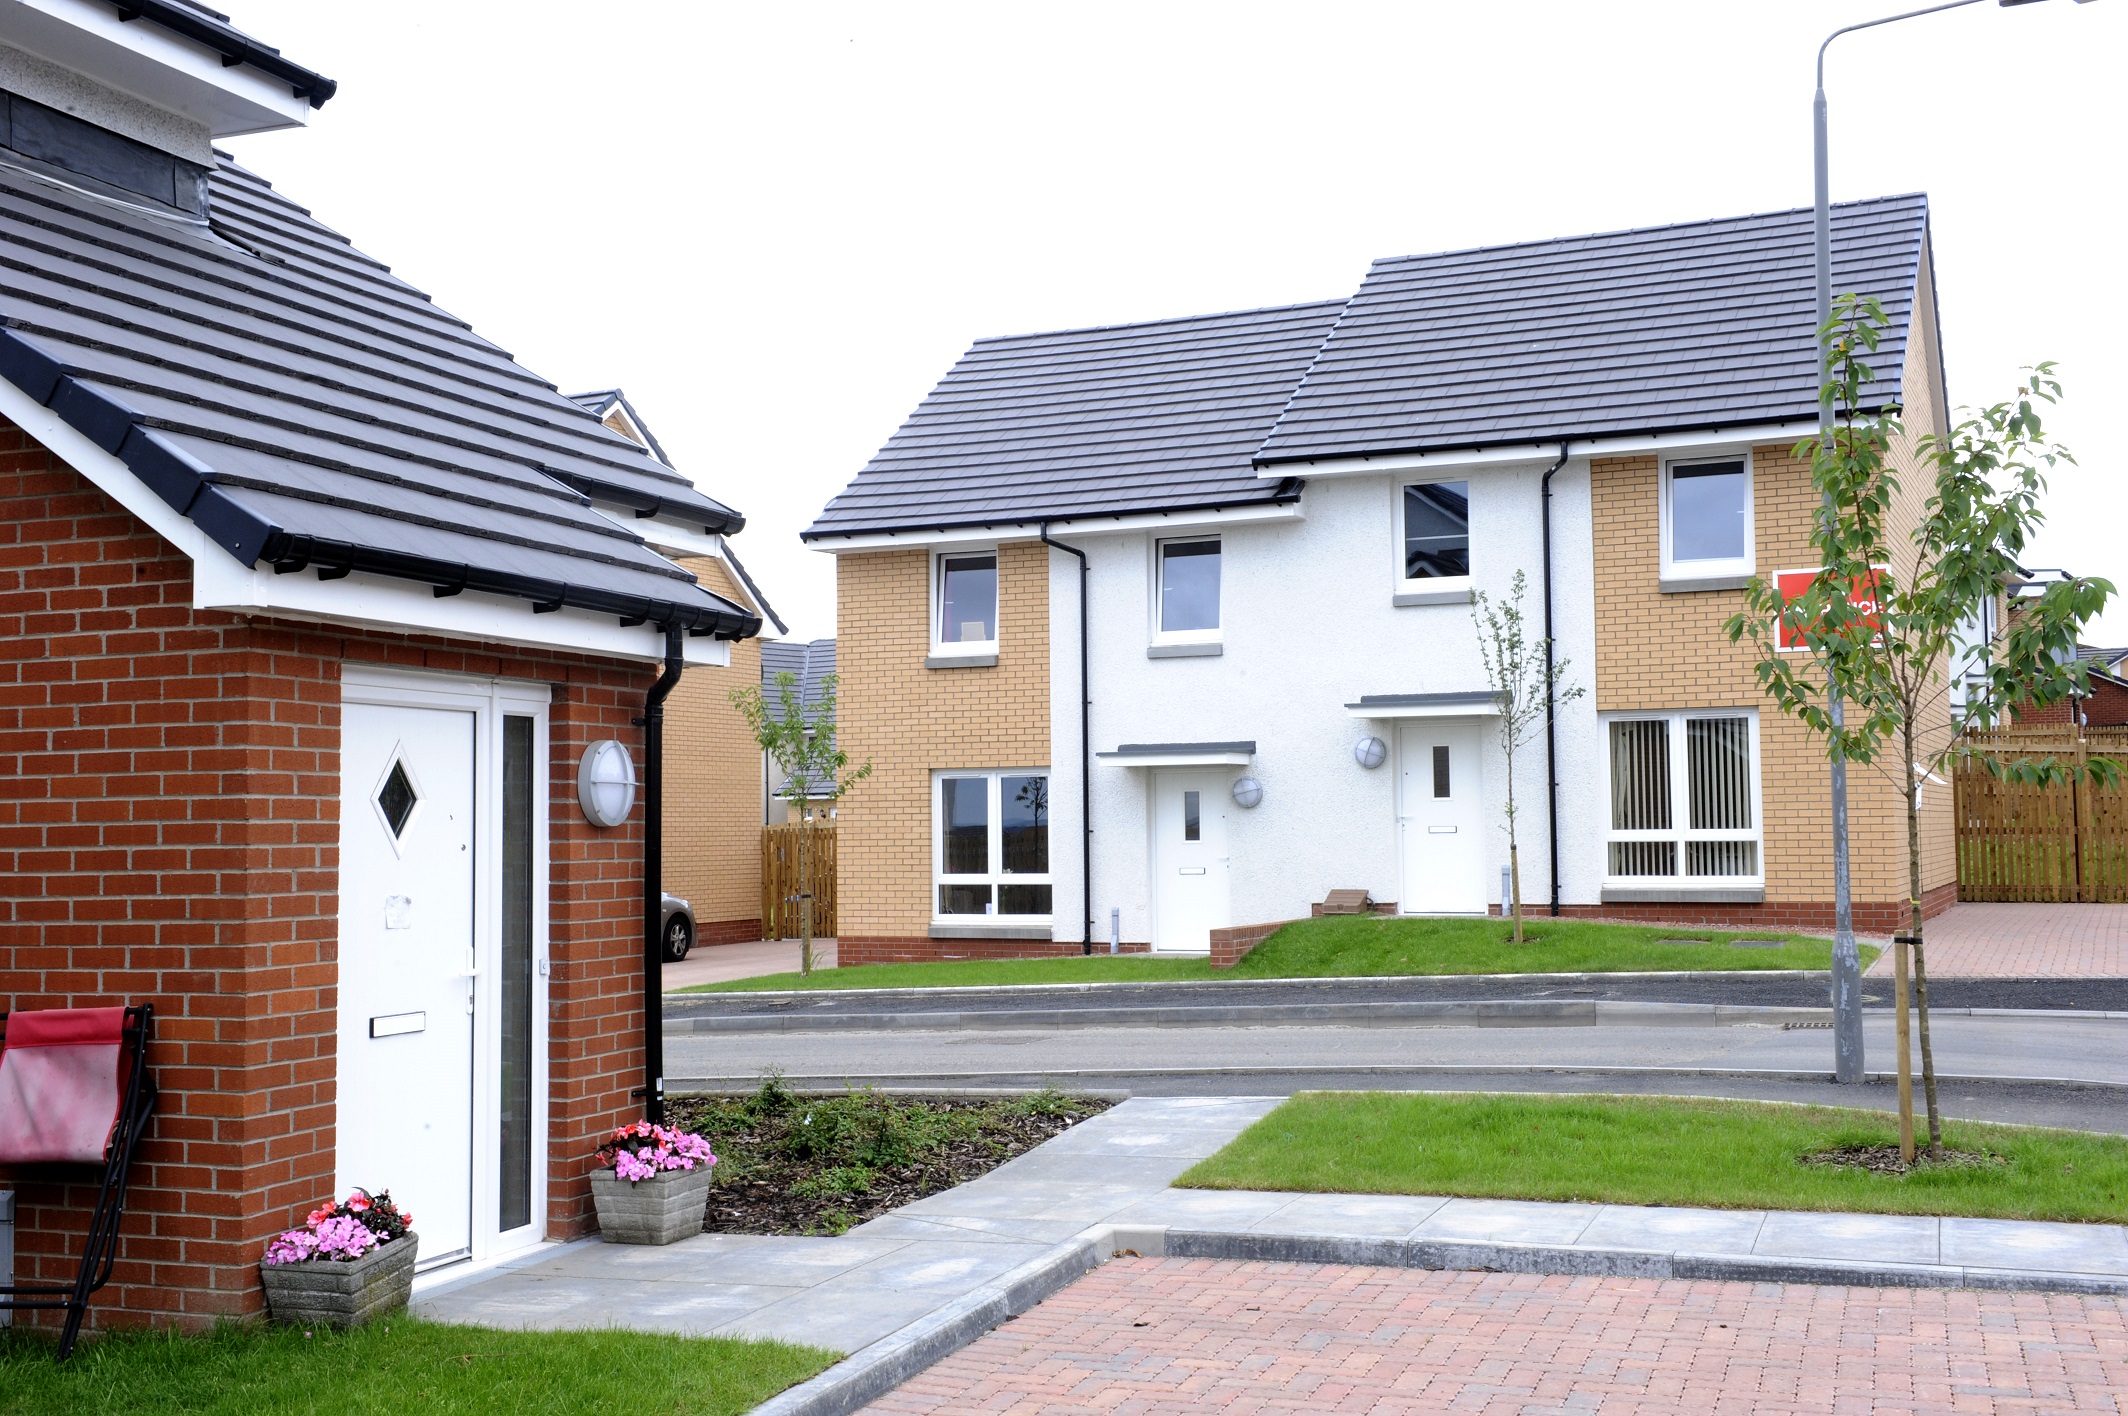 £18m housing investment agreed for Stirling area as rents go up 6%